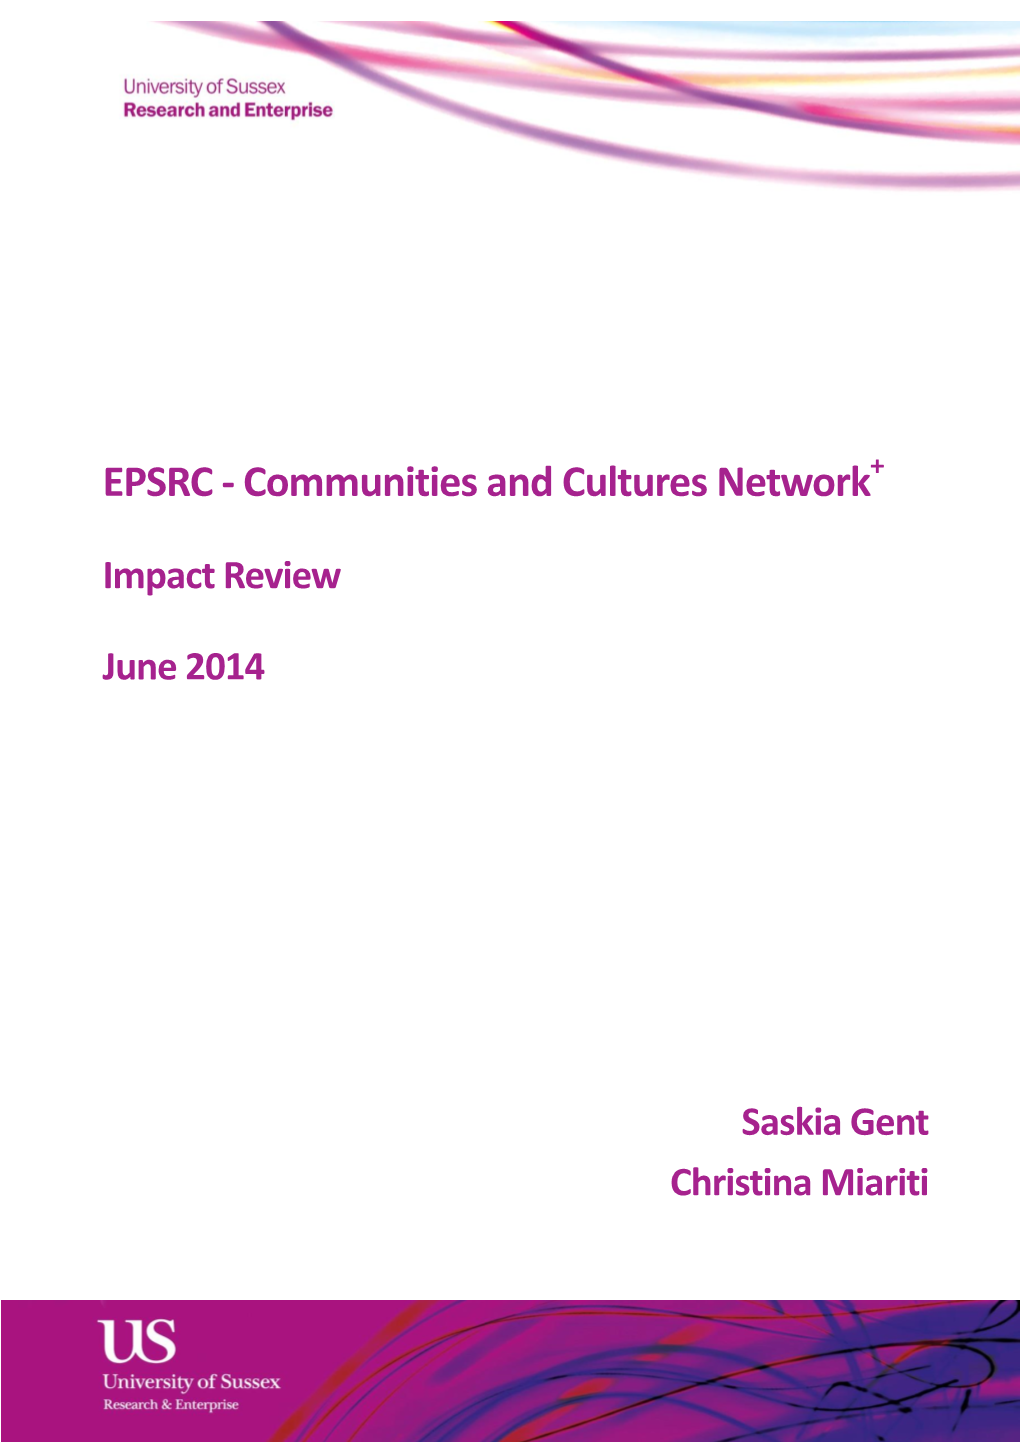 EPSRC - Communities and Cultures Network+